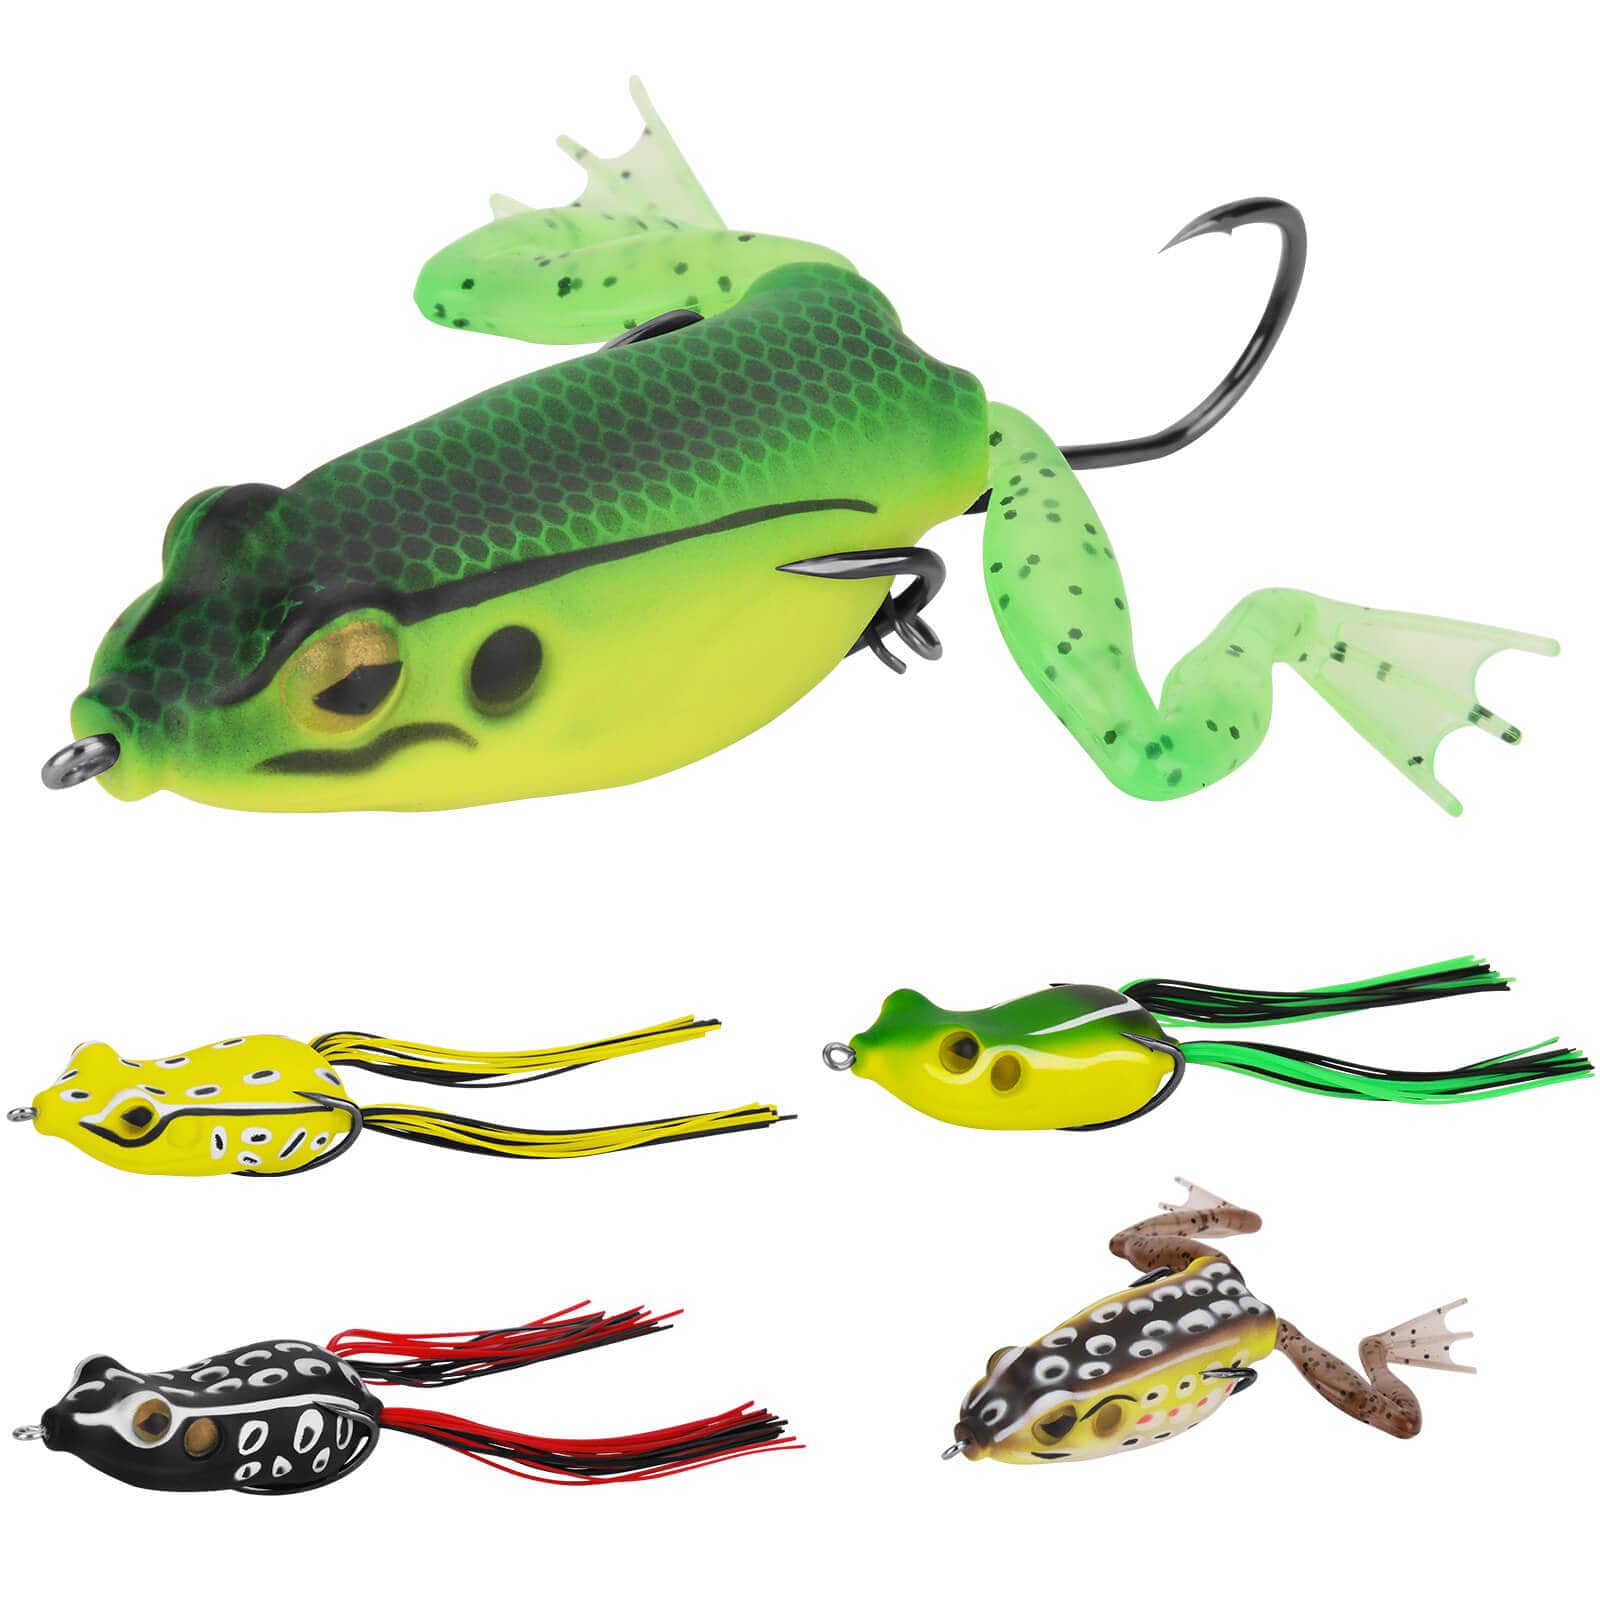 MeterMall Topwater Frog Lure Bass Trout Fishing Lures Kit Set Frog